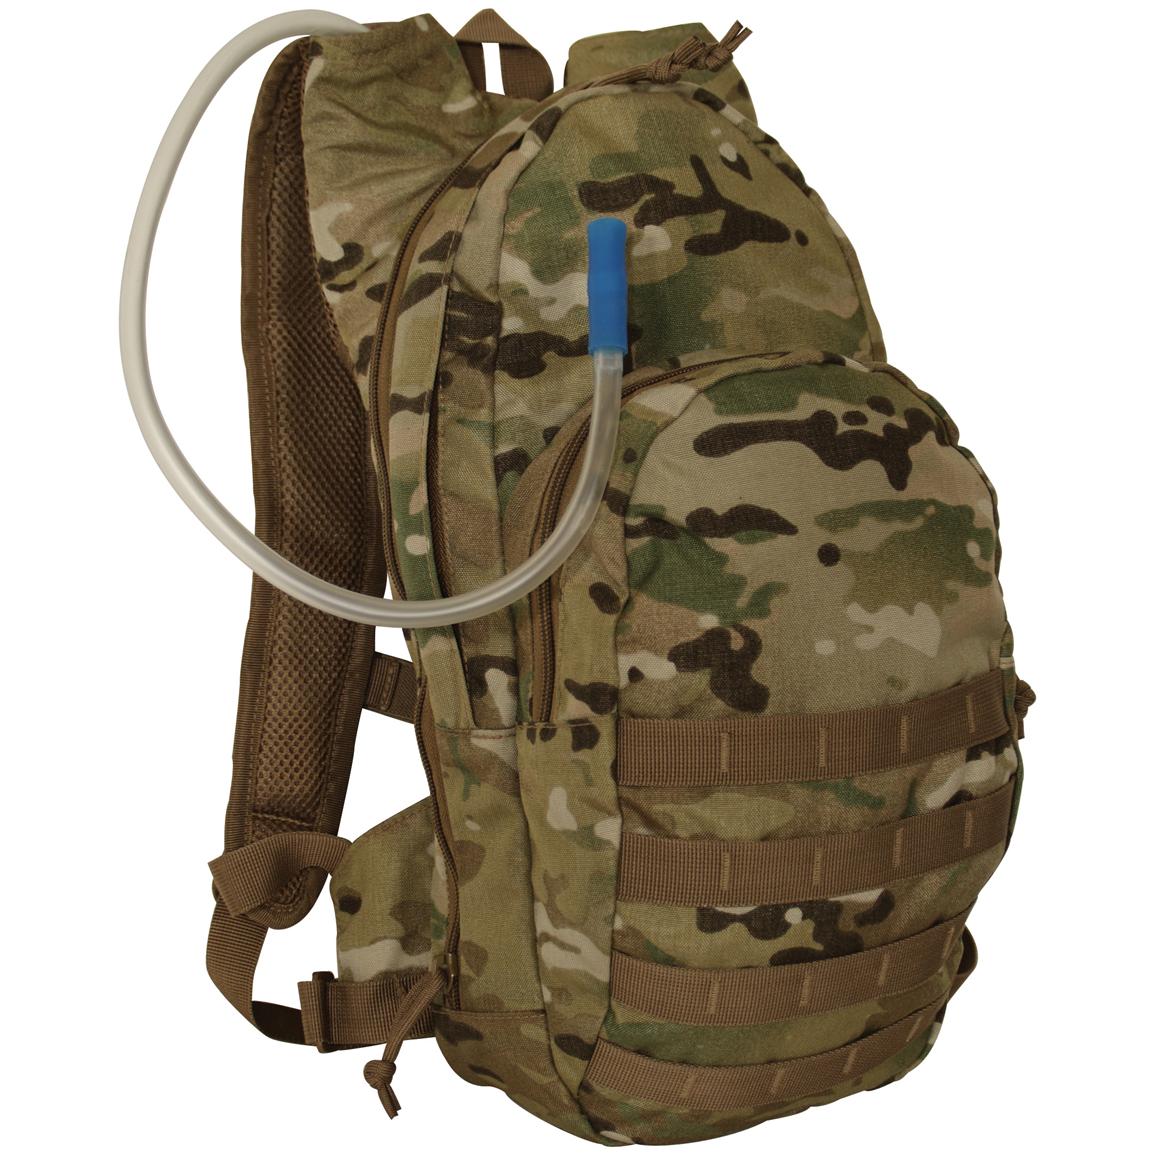 Voodoo Tactical™ MSP - 3 Enhanced Hydration Pack, MultiCam - 177525, Military Style Backpacks ...